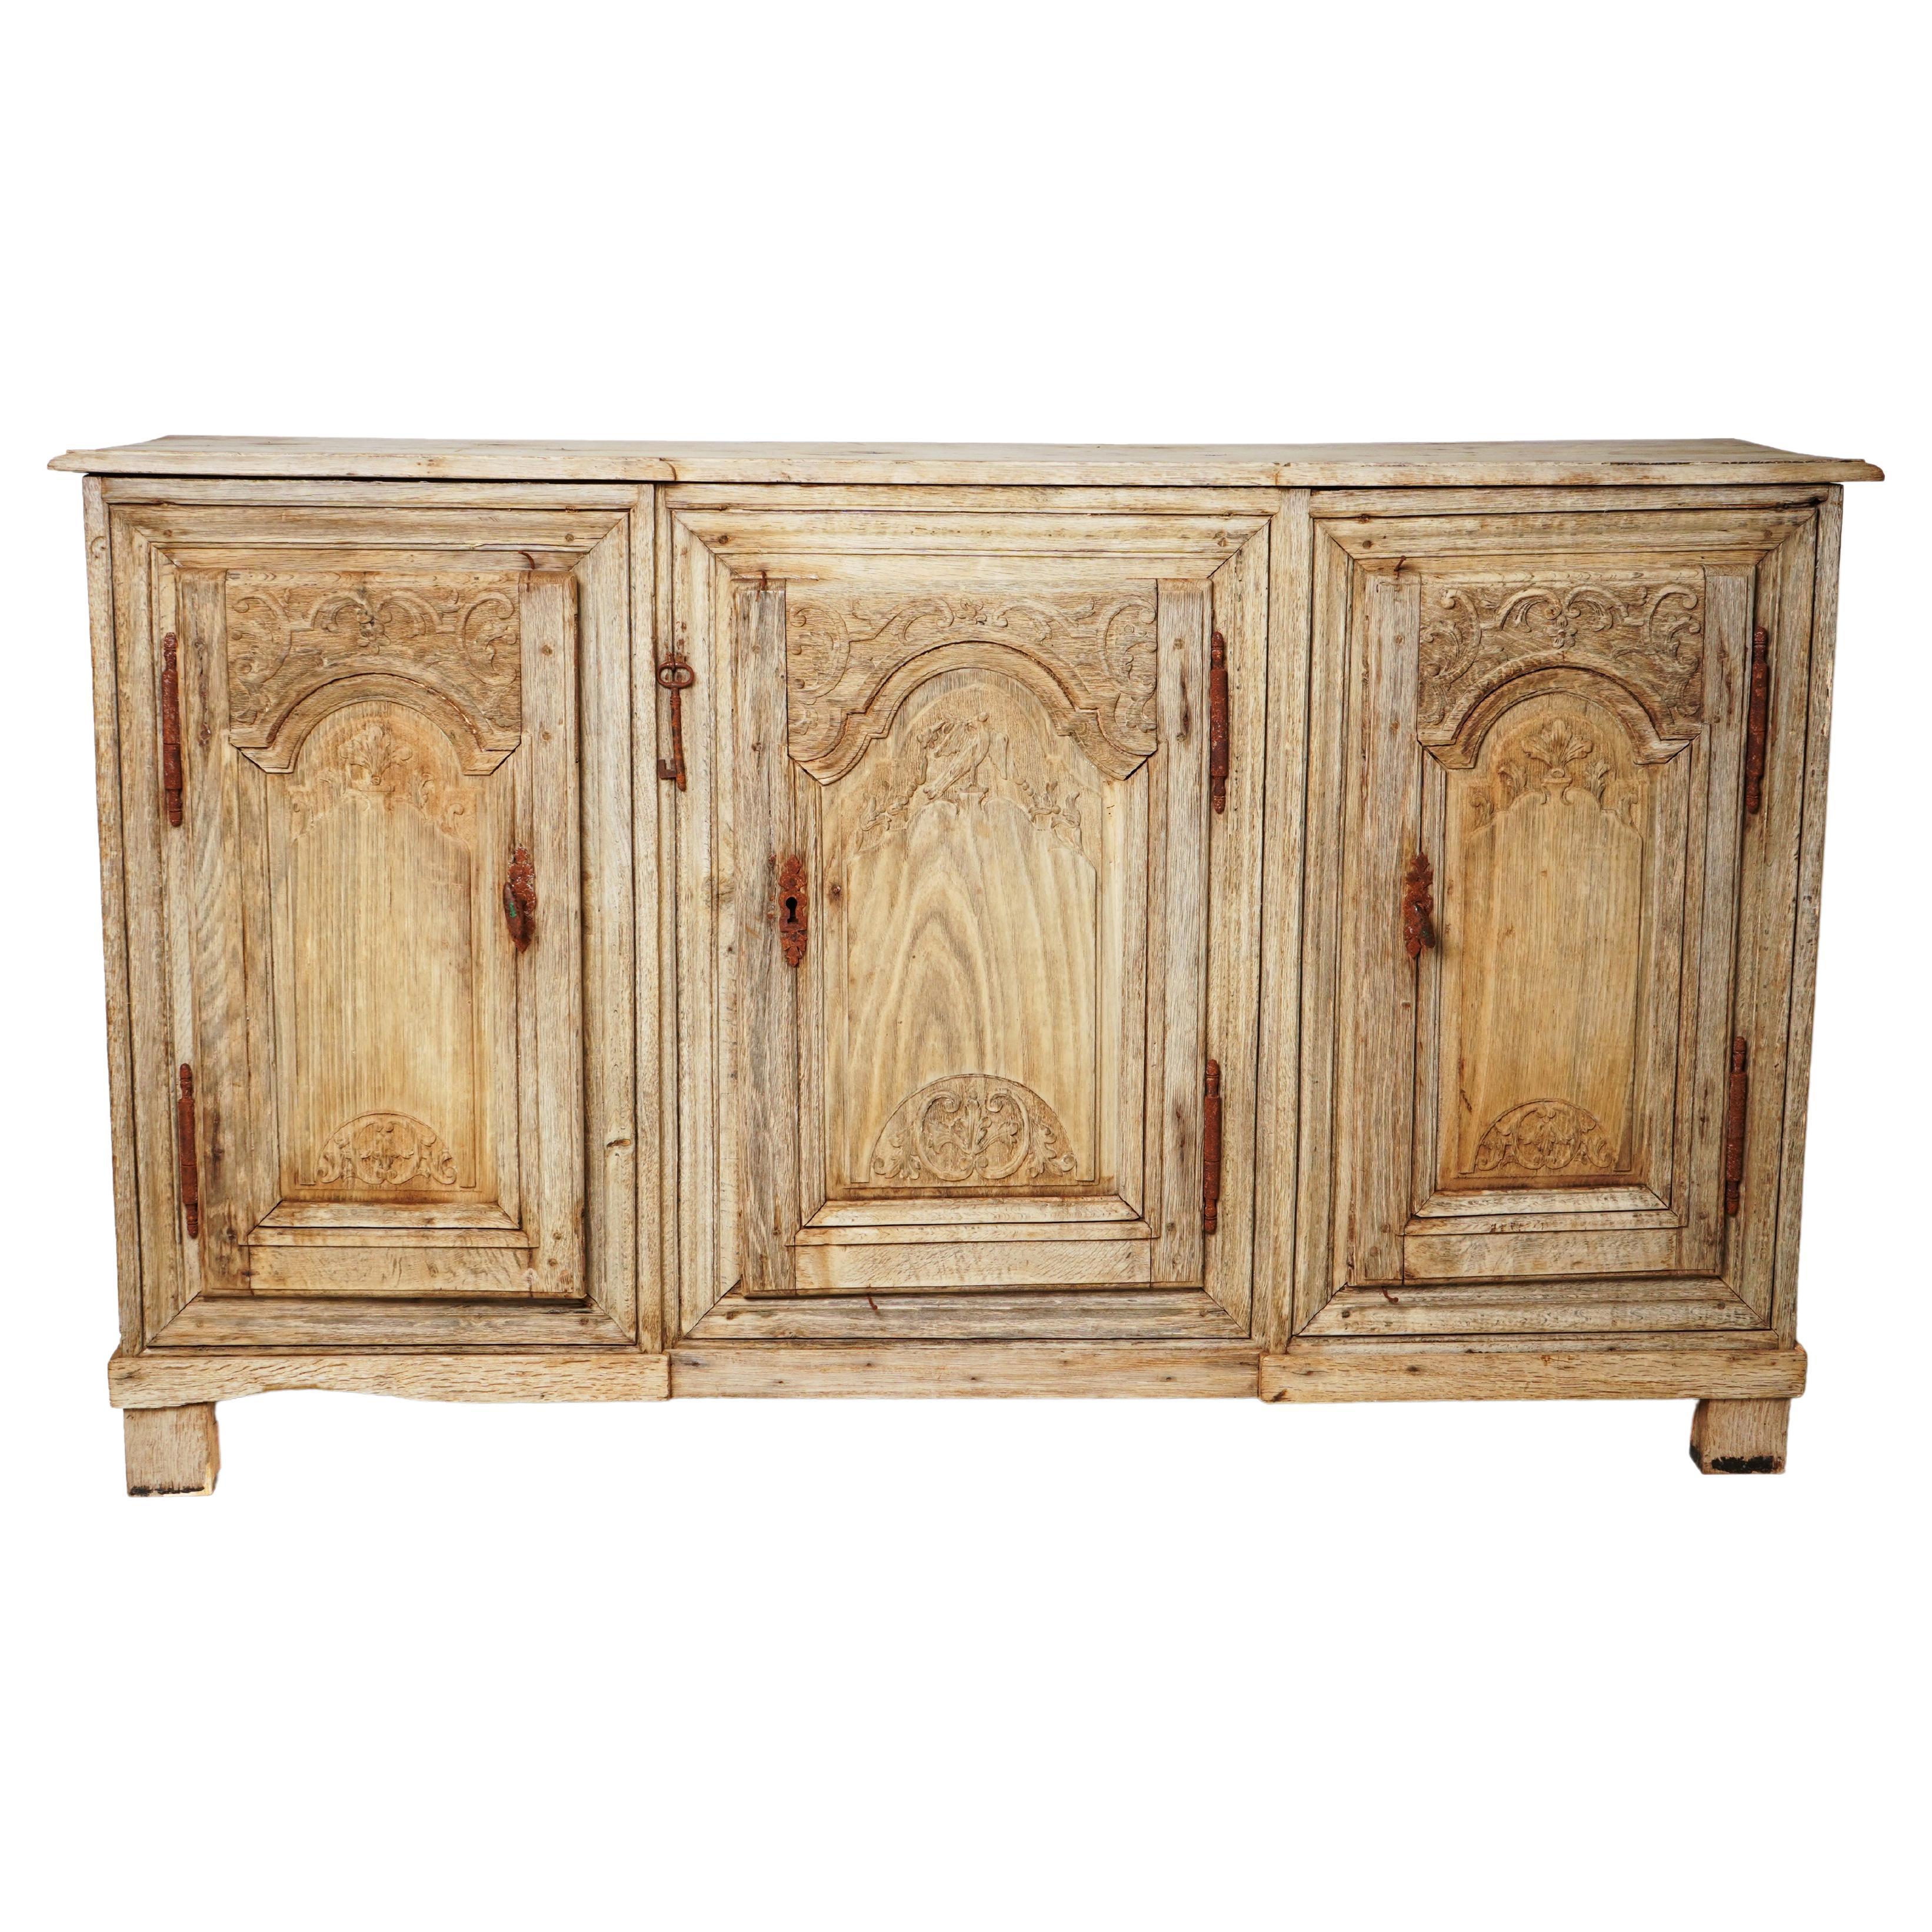 19th Century French Sideboard